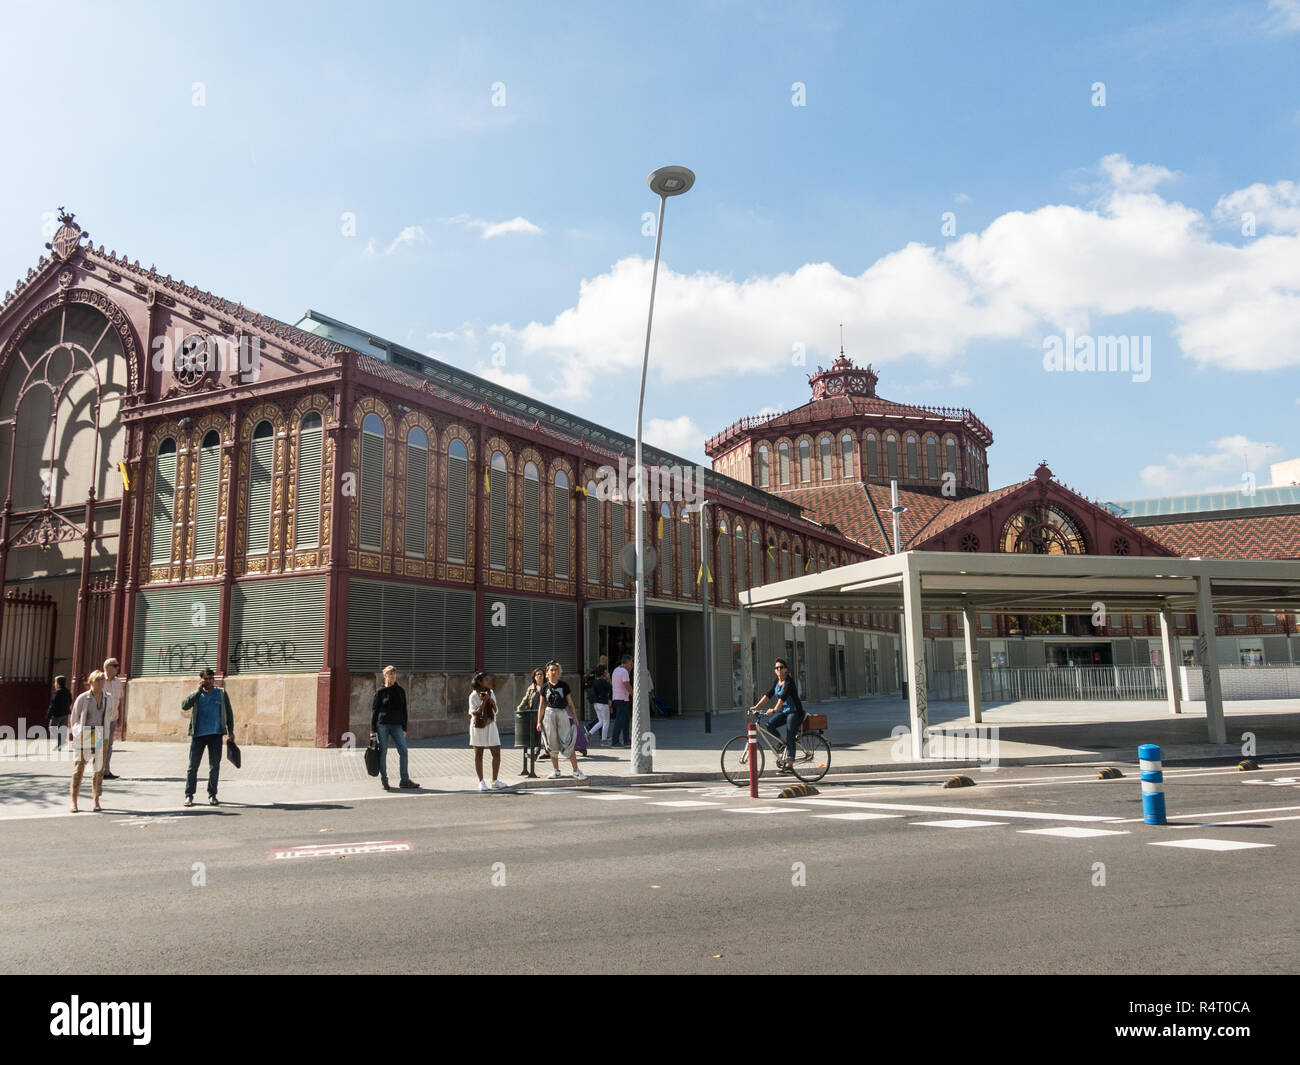 BARCELONA, SPAIN - October 17, 2018: Sant Antoni public market, where locals buy food and clothing producers. Created in 1882, it is made of iron and  Stock Photo